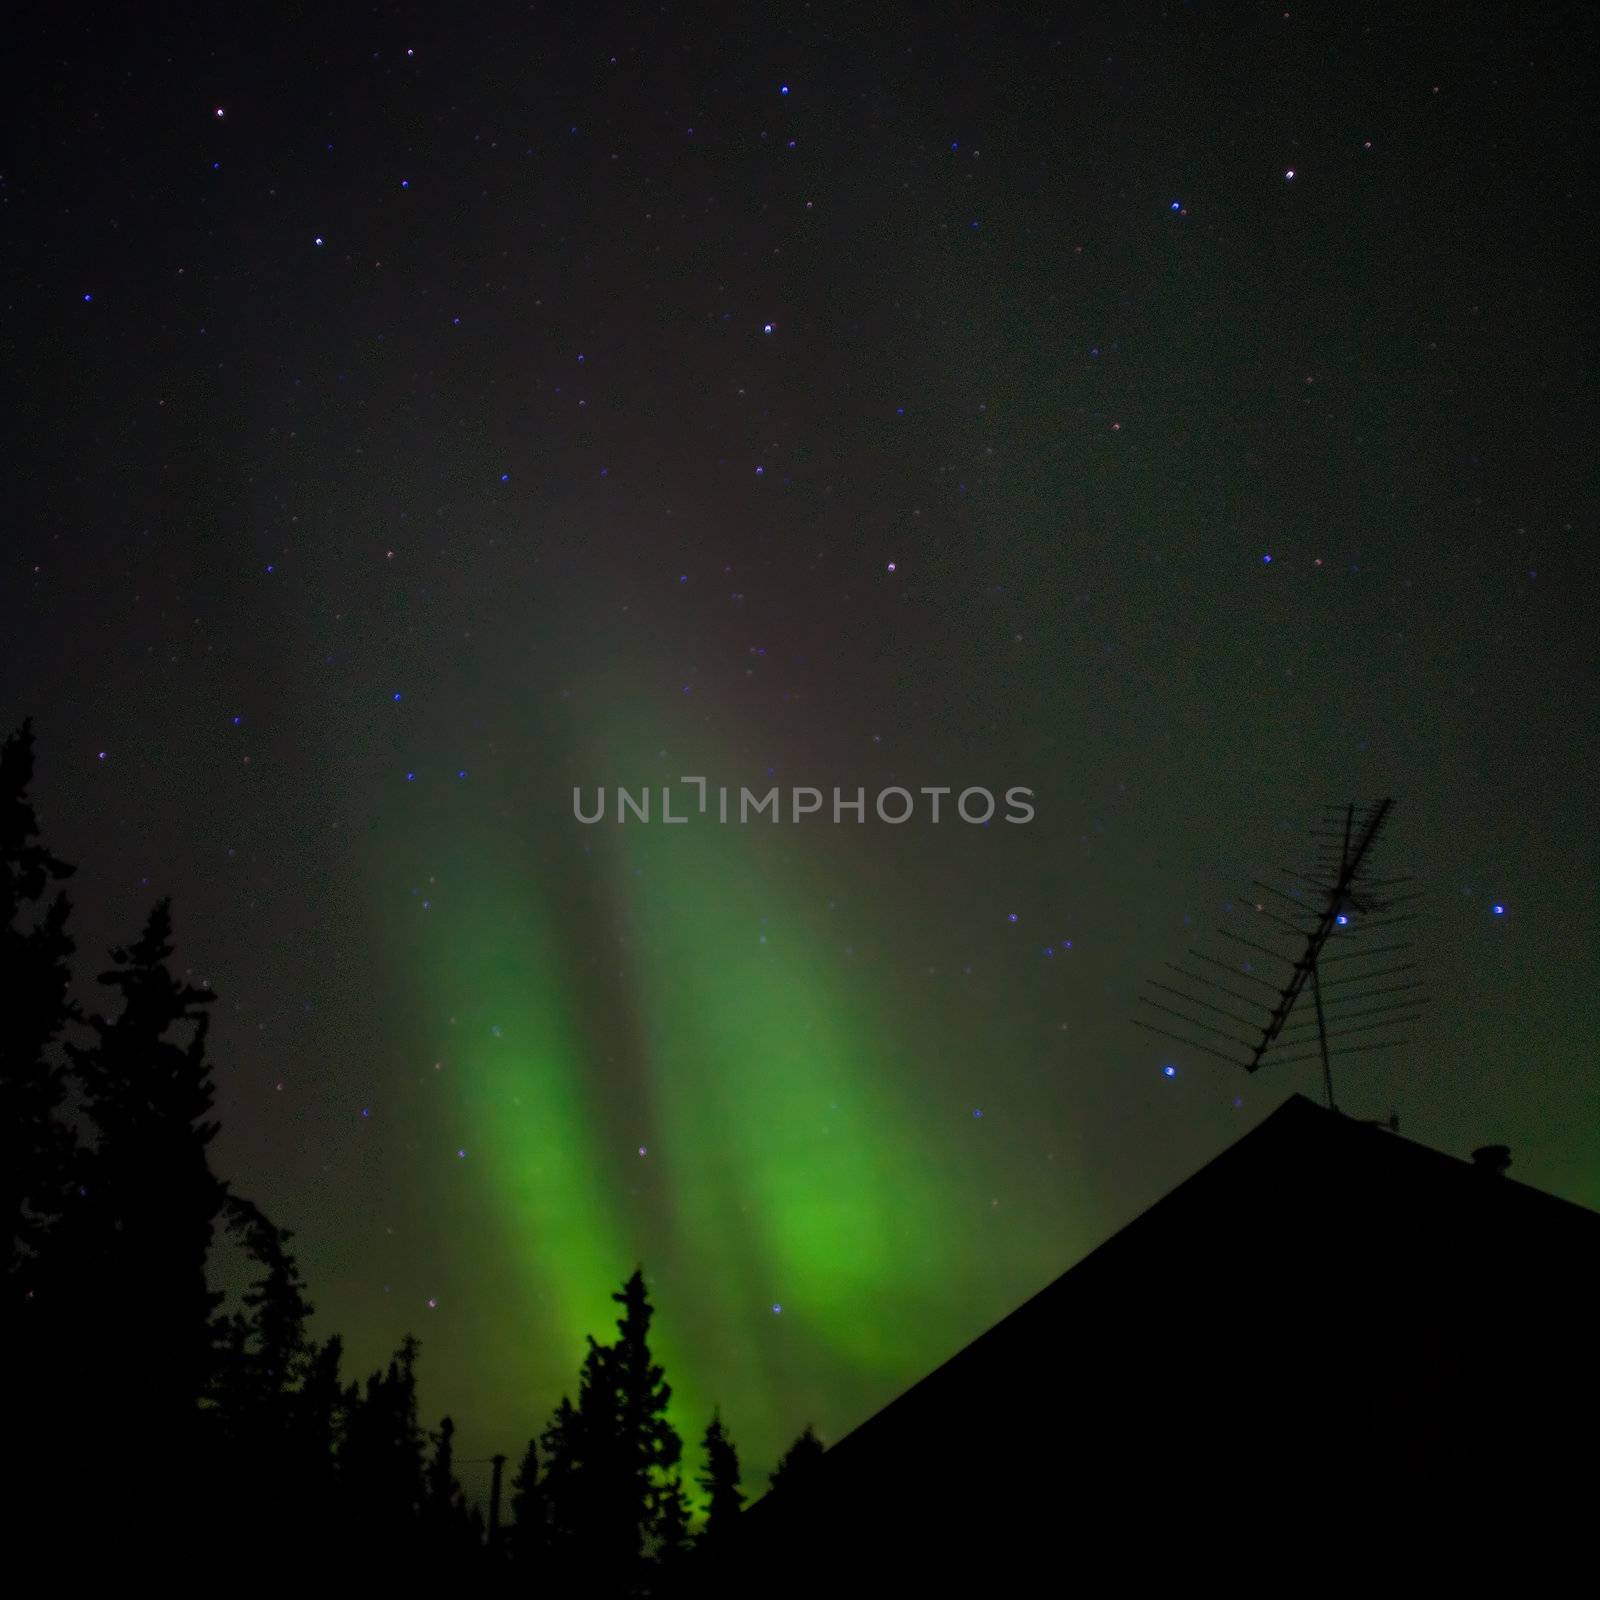 Bright northern lights (Aurora borealis) above house in northern Canada.